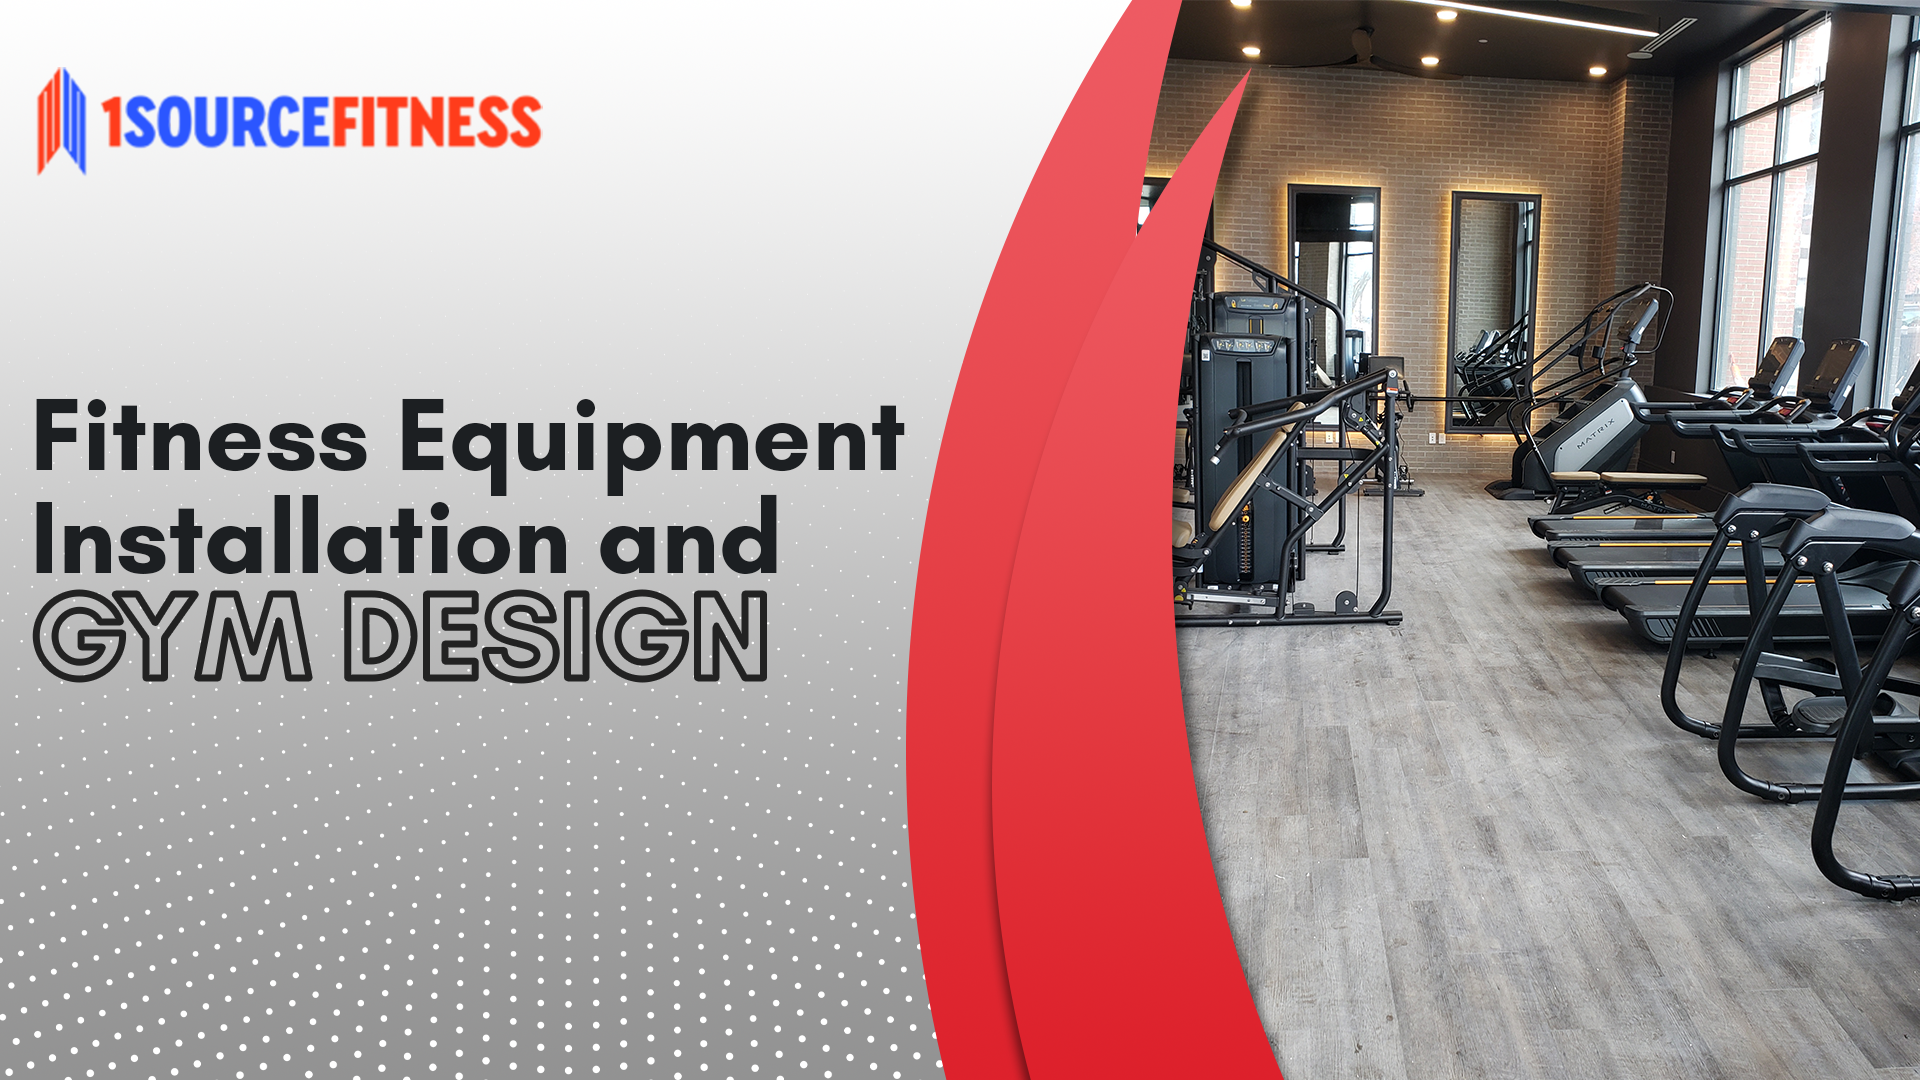 A gym with various equipment. The text reads "Fitness Equipment Installation and Gym Design"